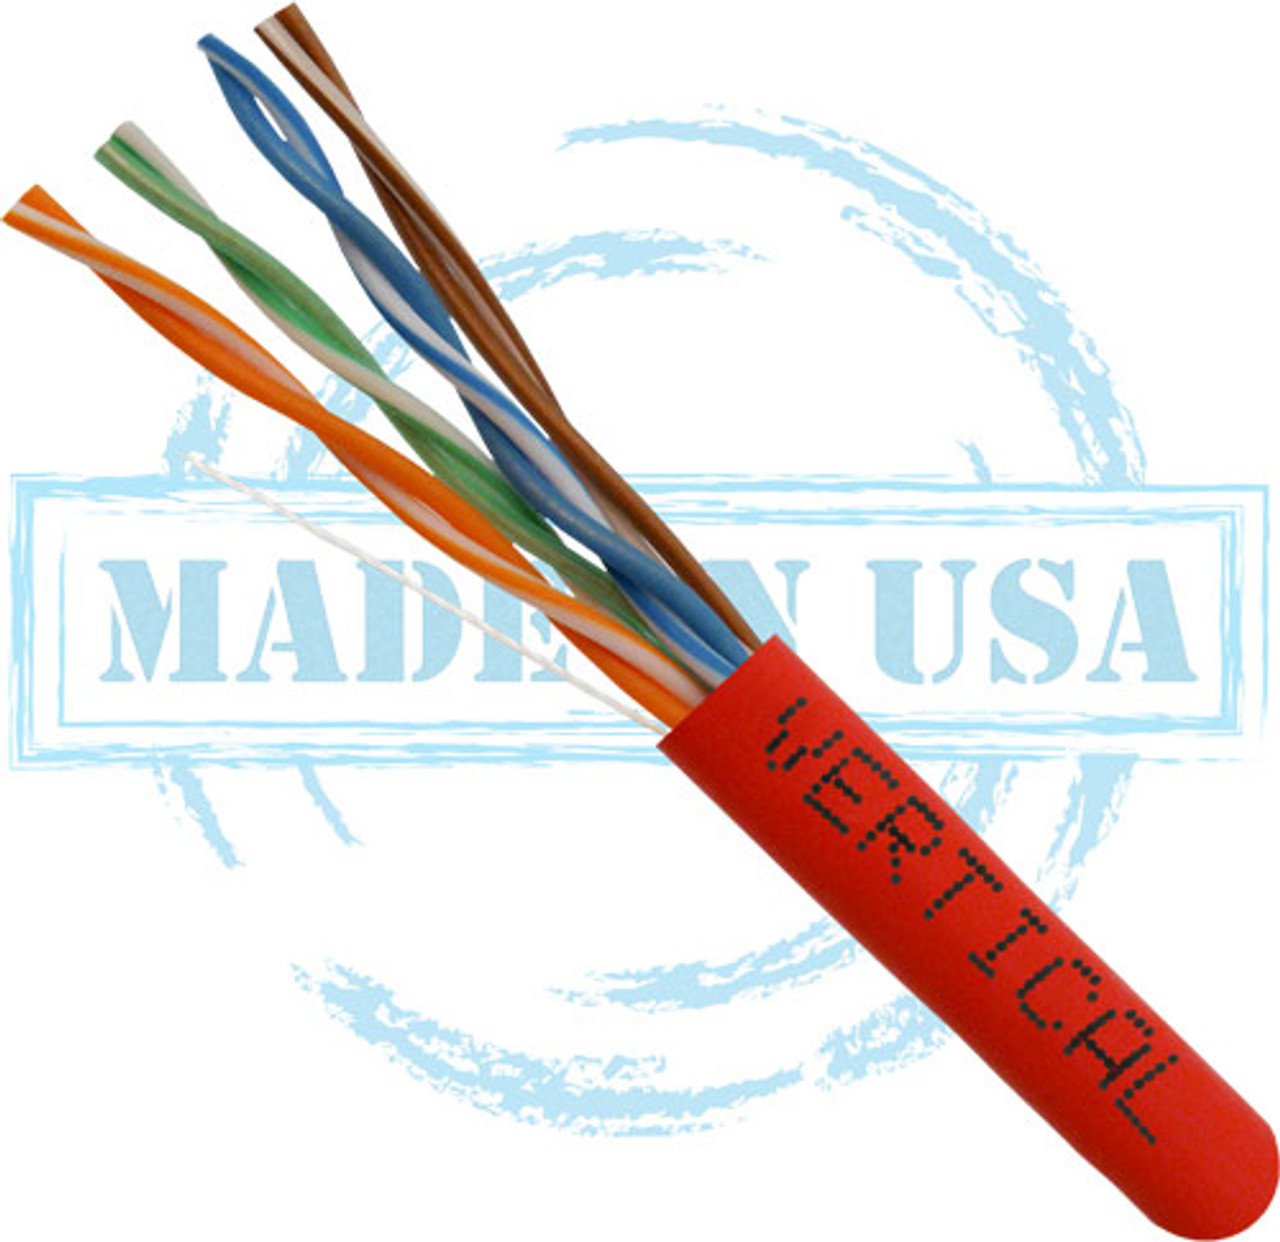 CAT6, Plenum, MADE IN USA, 23AWG, UTP, 4 Pair, Solid Bare Copper, 550MHz, 1000ft Pull Box, Red